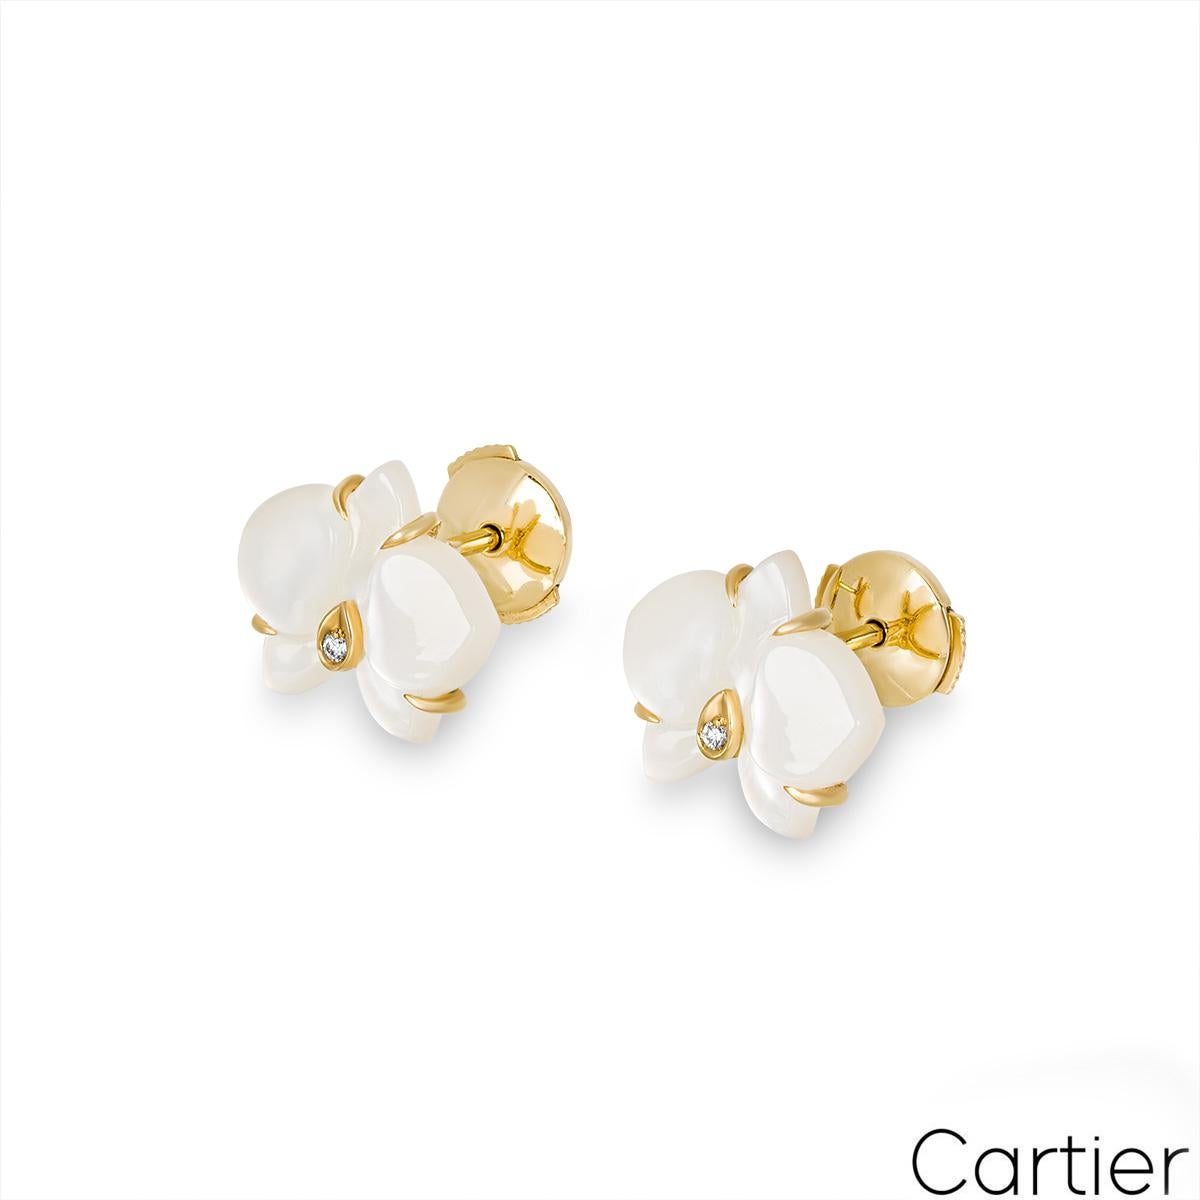 A beautiful pair of 18k yellow gold mother of pearl and diamond earrings by Cartier from the Caresse d’Orchidées collection. The stud style earrings feature an orchid motif carved out of mother of pearl and adorned with a round brilliant cut diamond